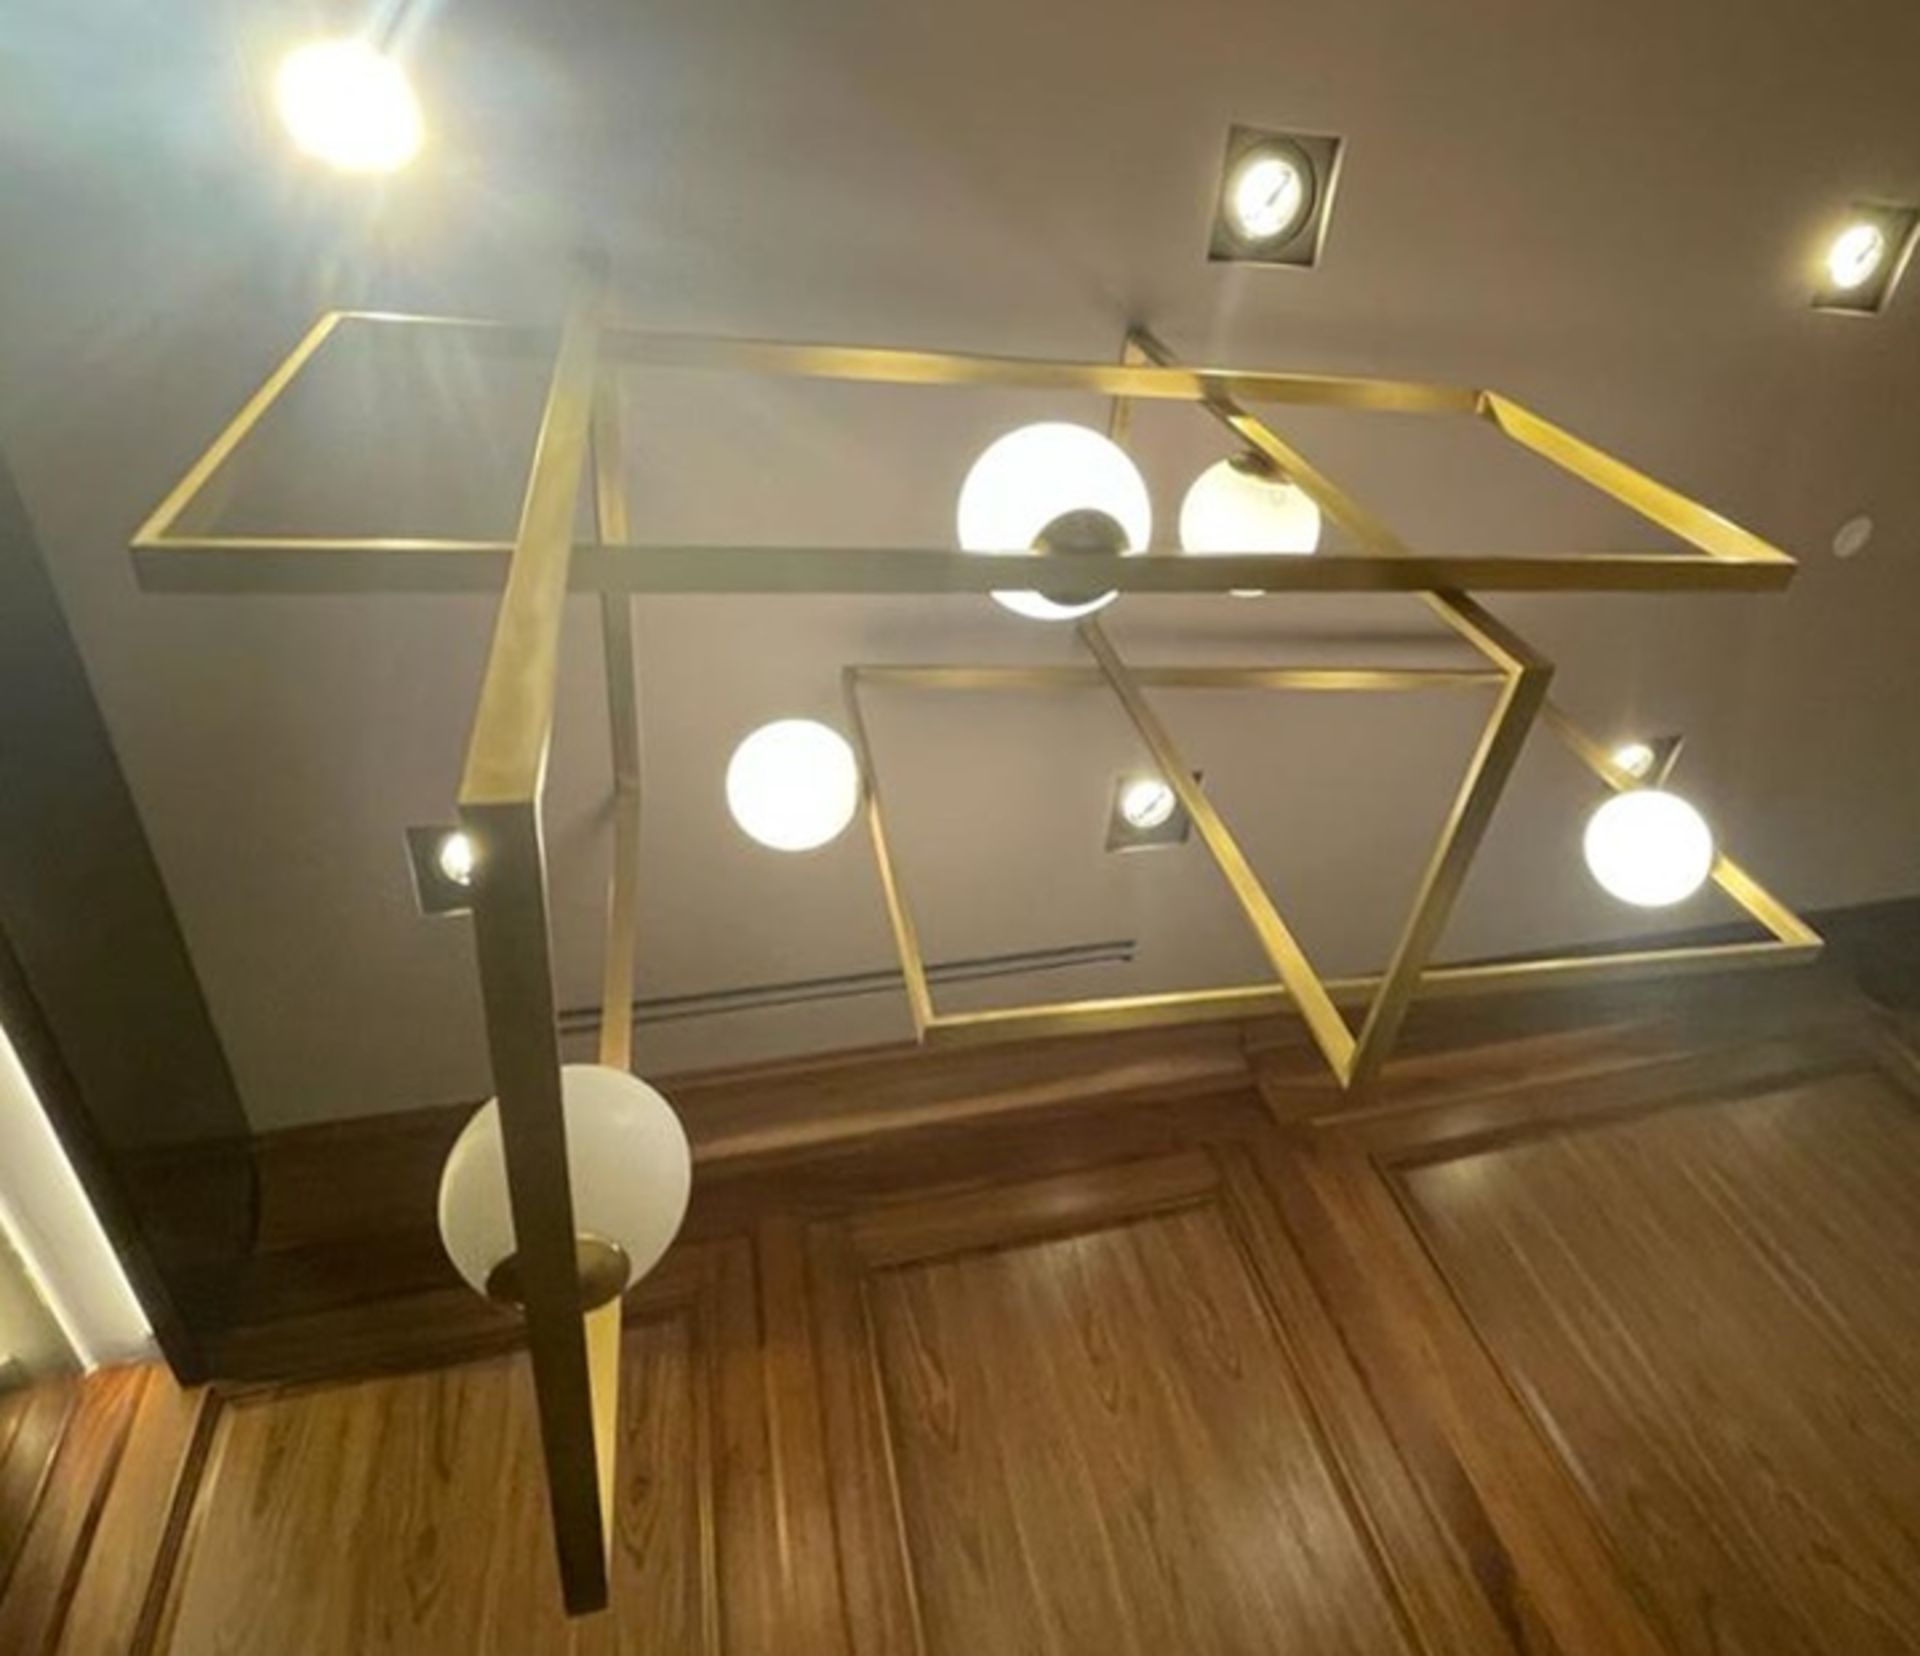 1 x Abstract Suspension Chandelier With Geometric Interlocking Panels and Blown Opal Glass Shades - Image 3 of 6